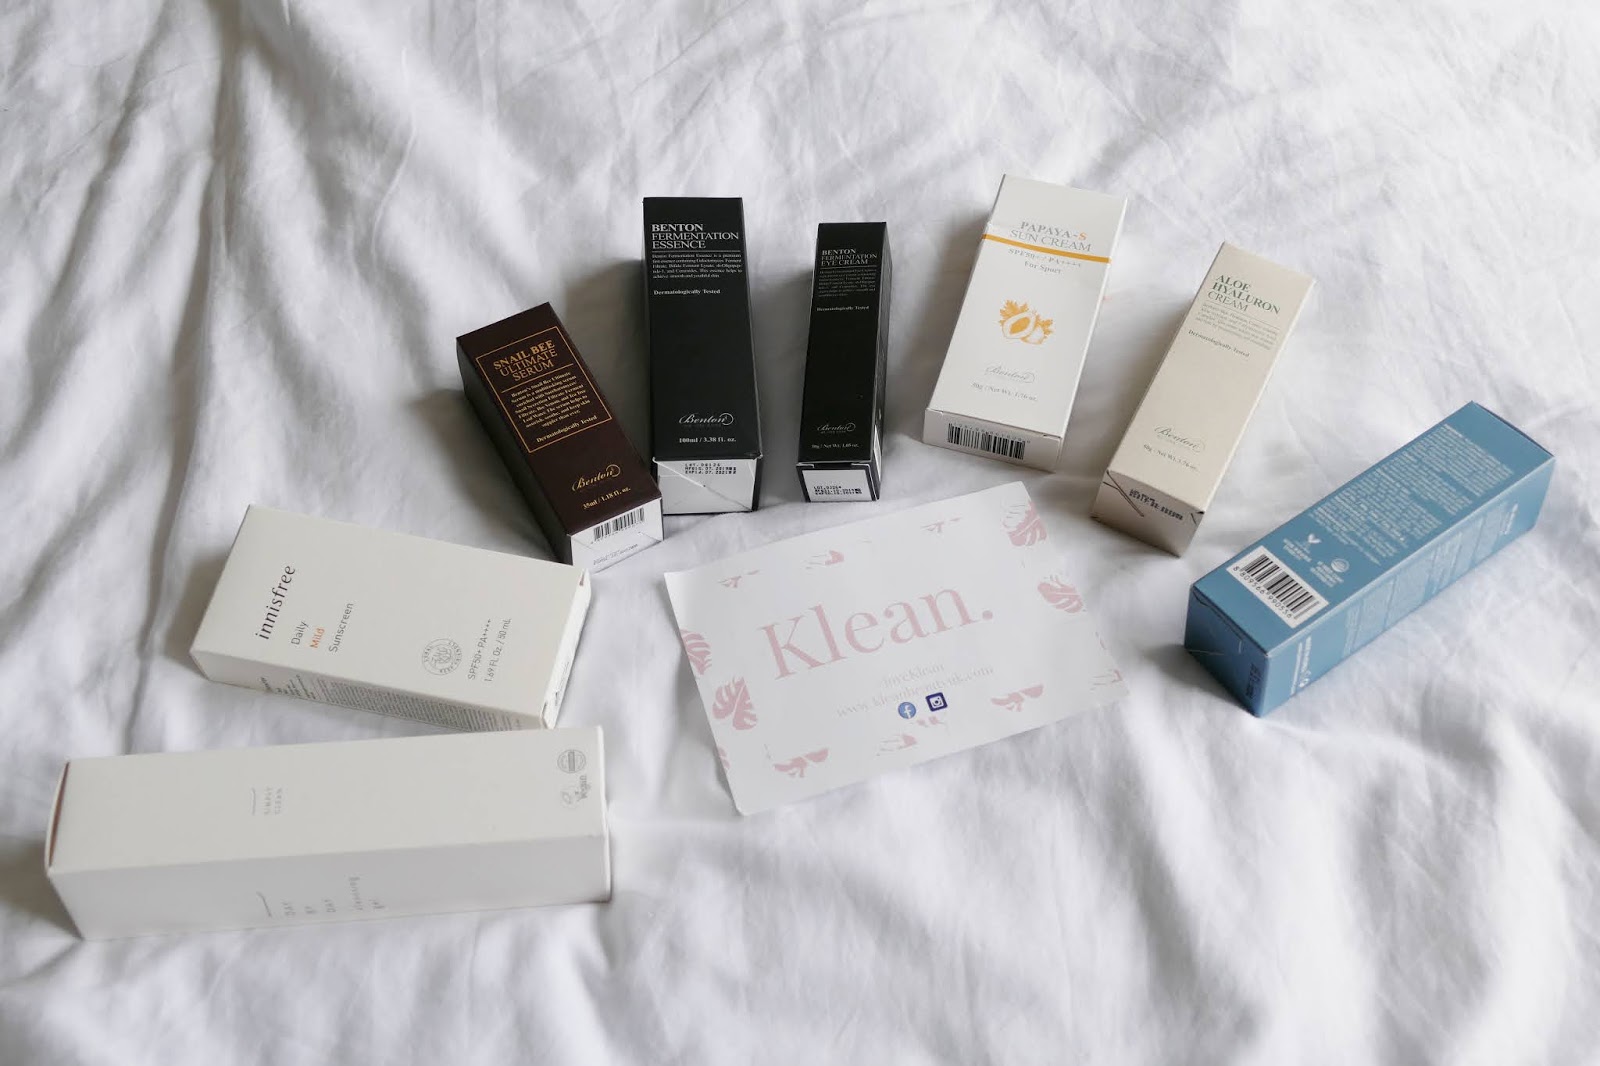 Where To Shop For Korean Beauty Products in the UK- Klean Review 